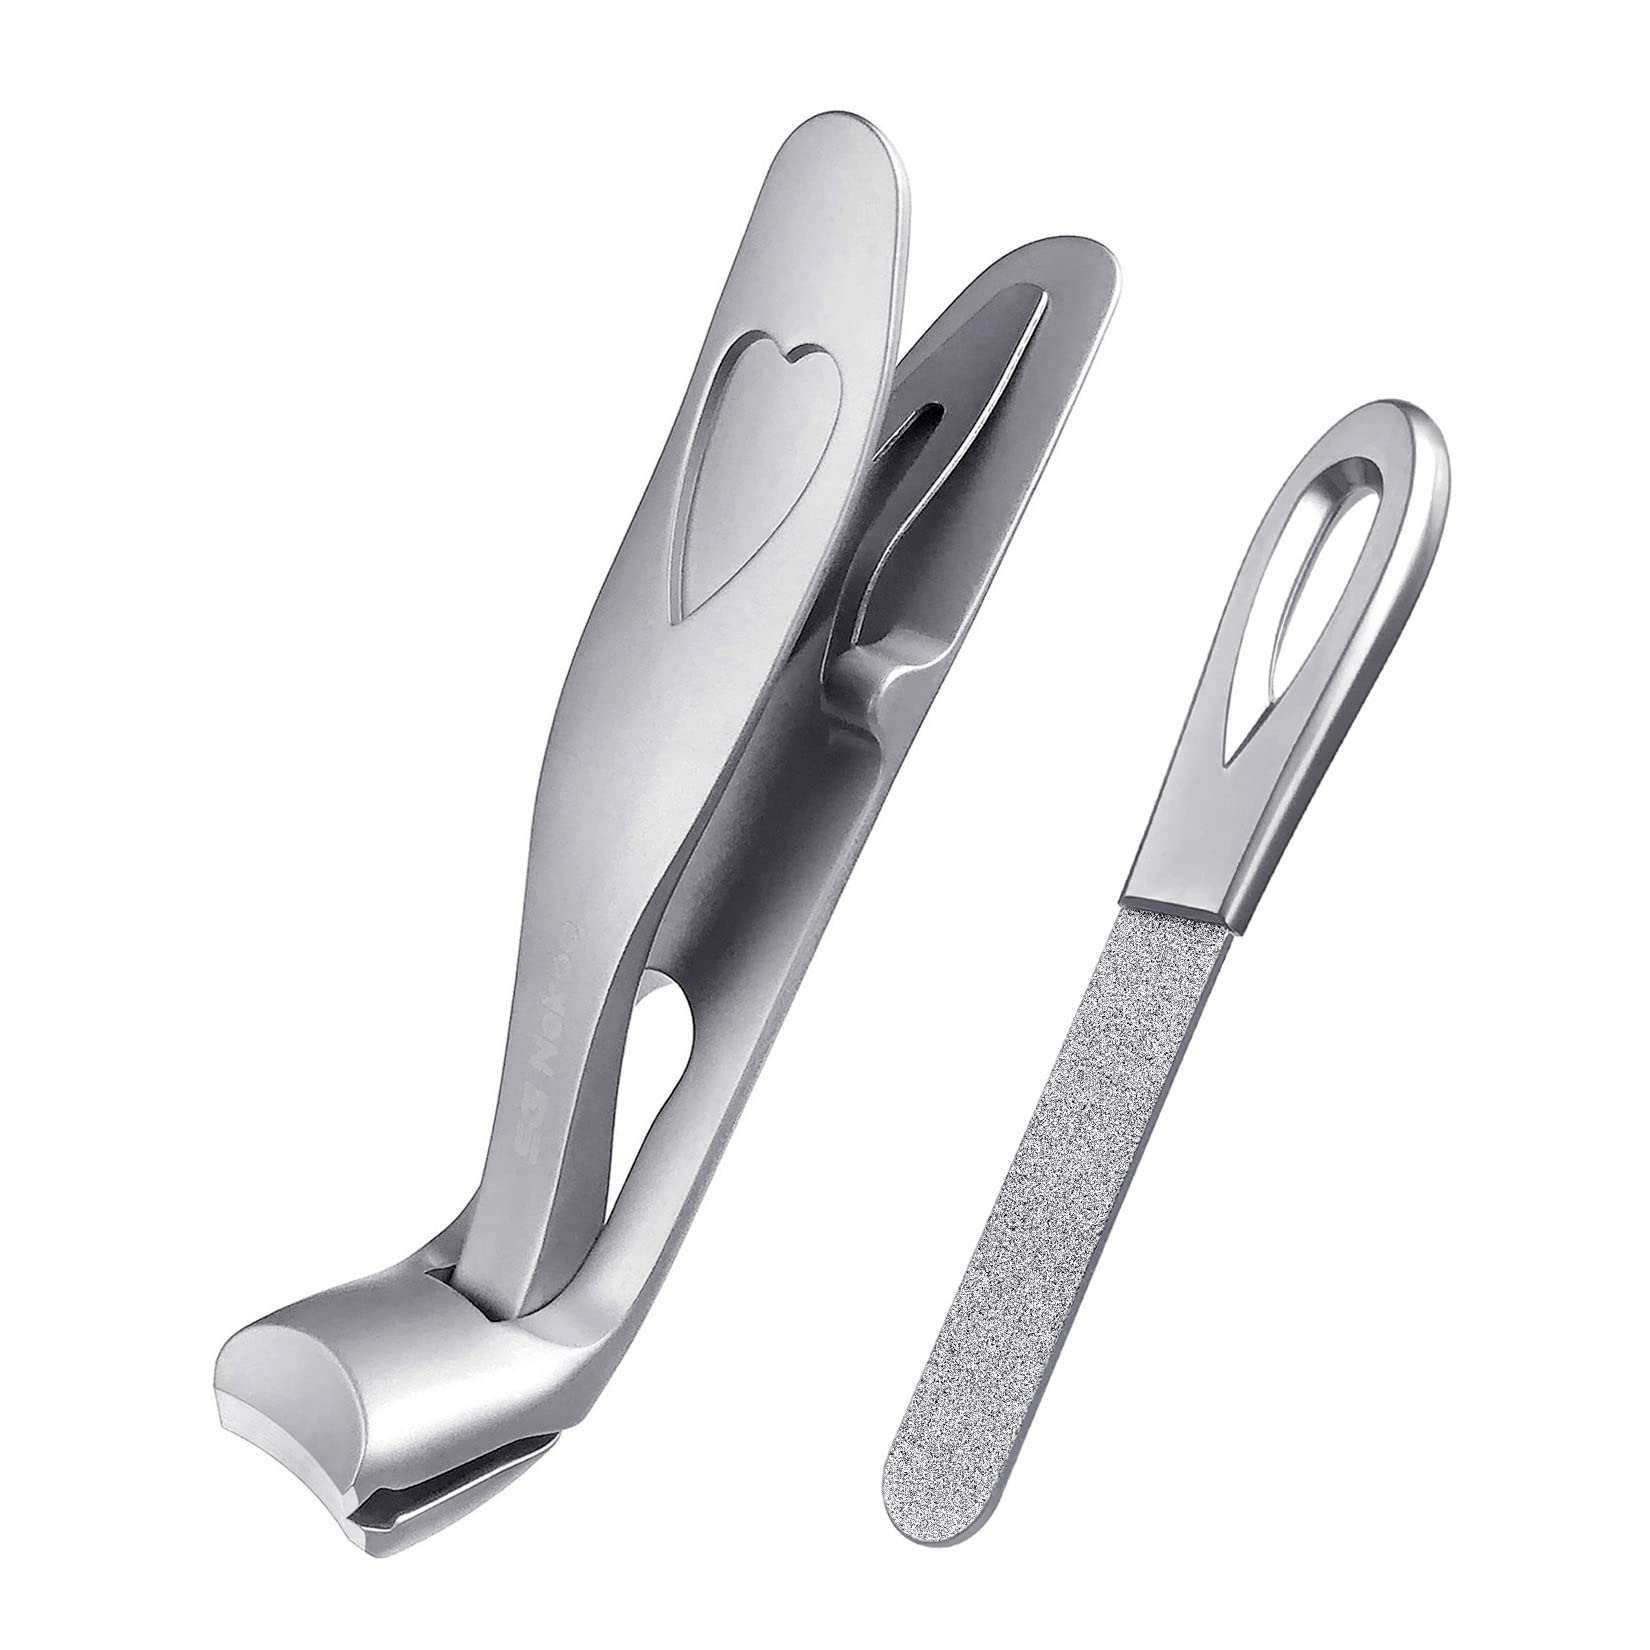 1pc New Type Of Large Opening Nail Clipper With A 45-degree Angled Blade Is  More In Line With The Curvature Of Fingers And Toes. S9195 for shops